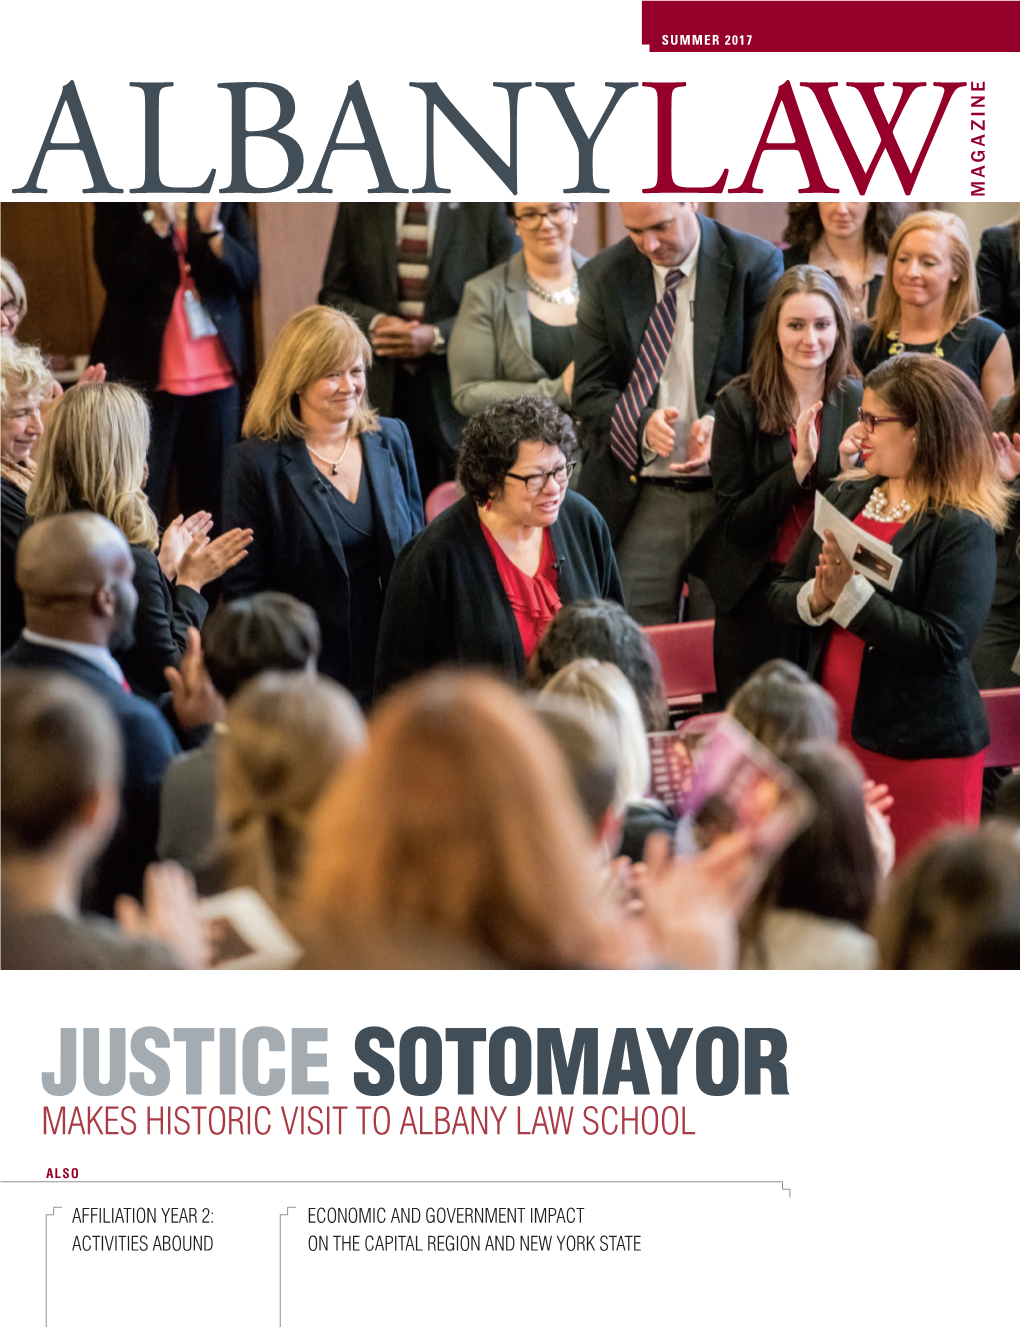 Justice Sotomayor Makes Historic Visit to Albany Law School